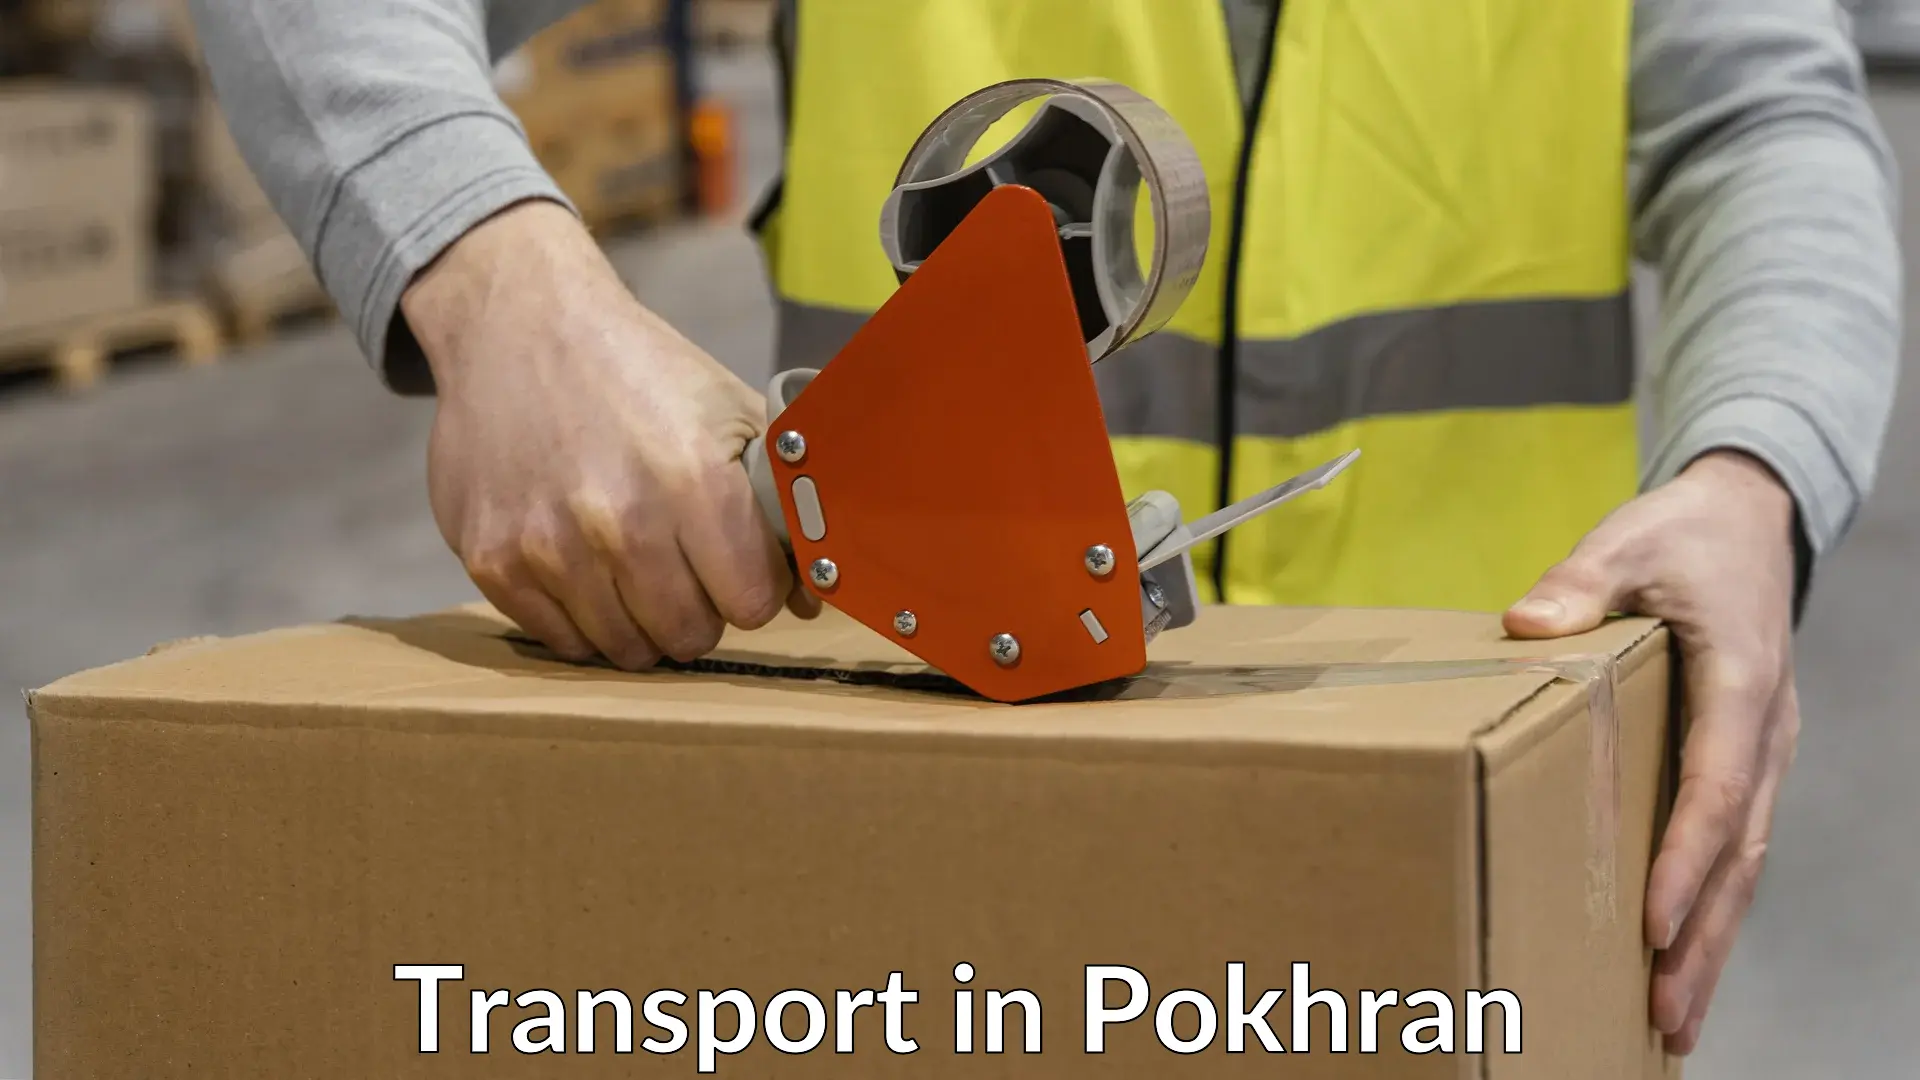 Air freight transport services in Pokhran